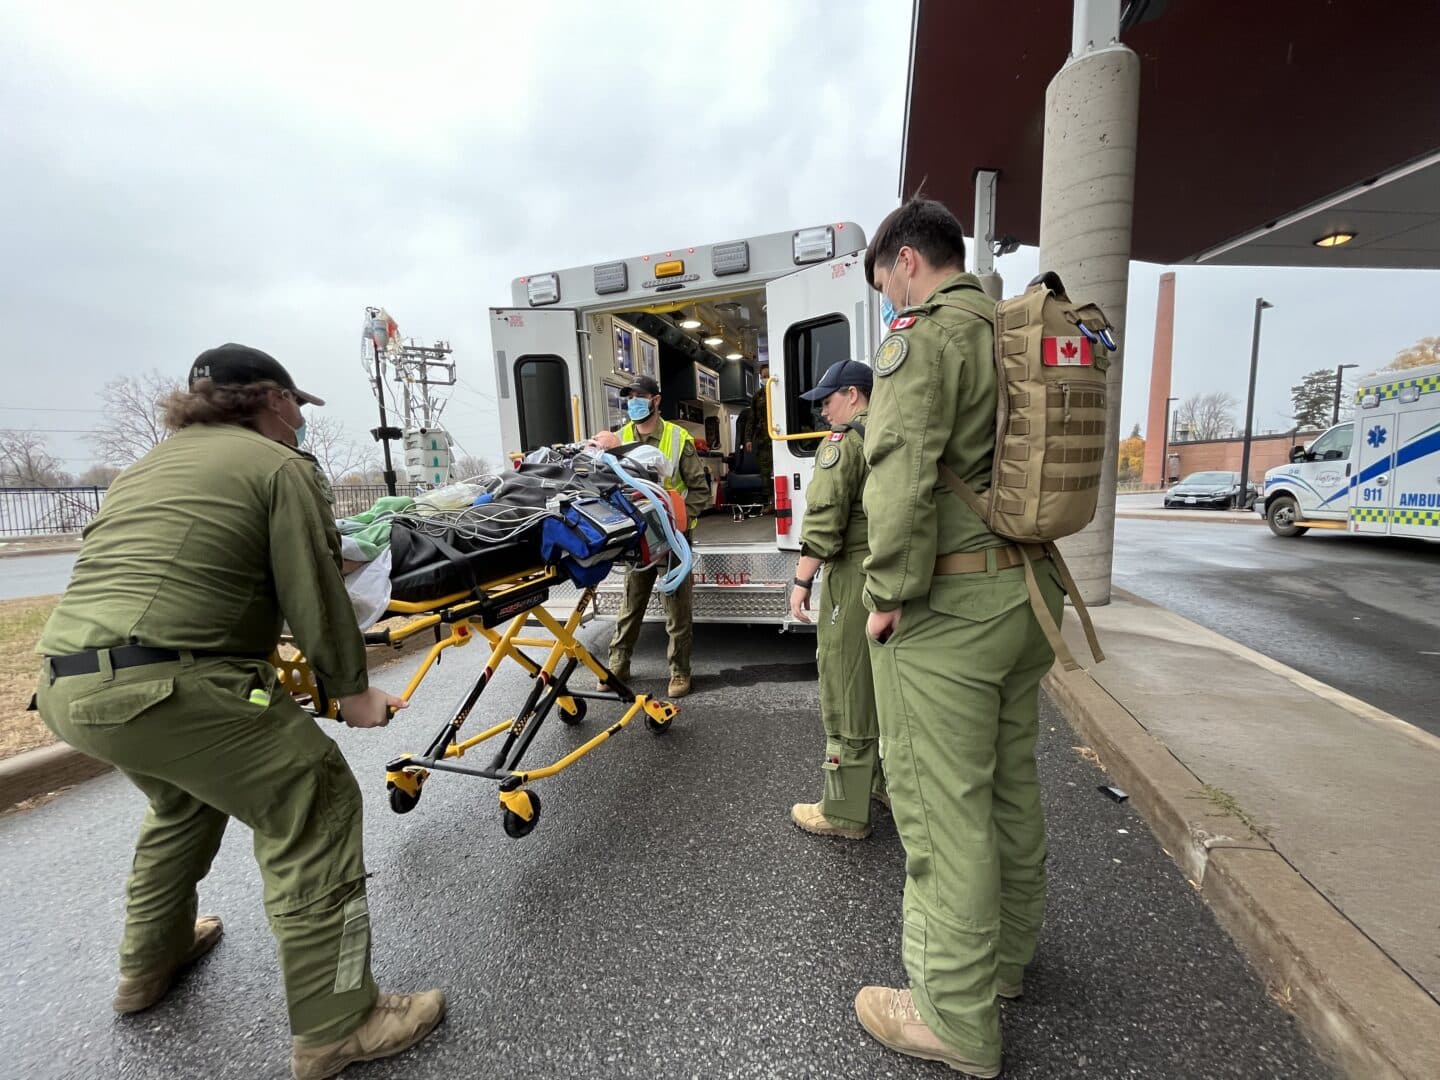 Military personnel load a simulated patient into an ambulance.